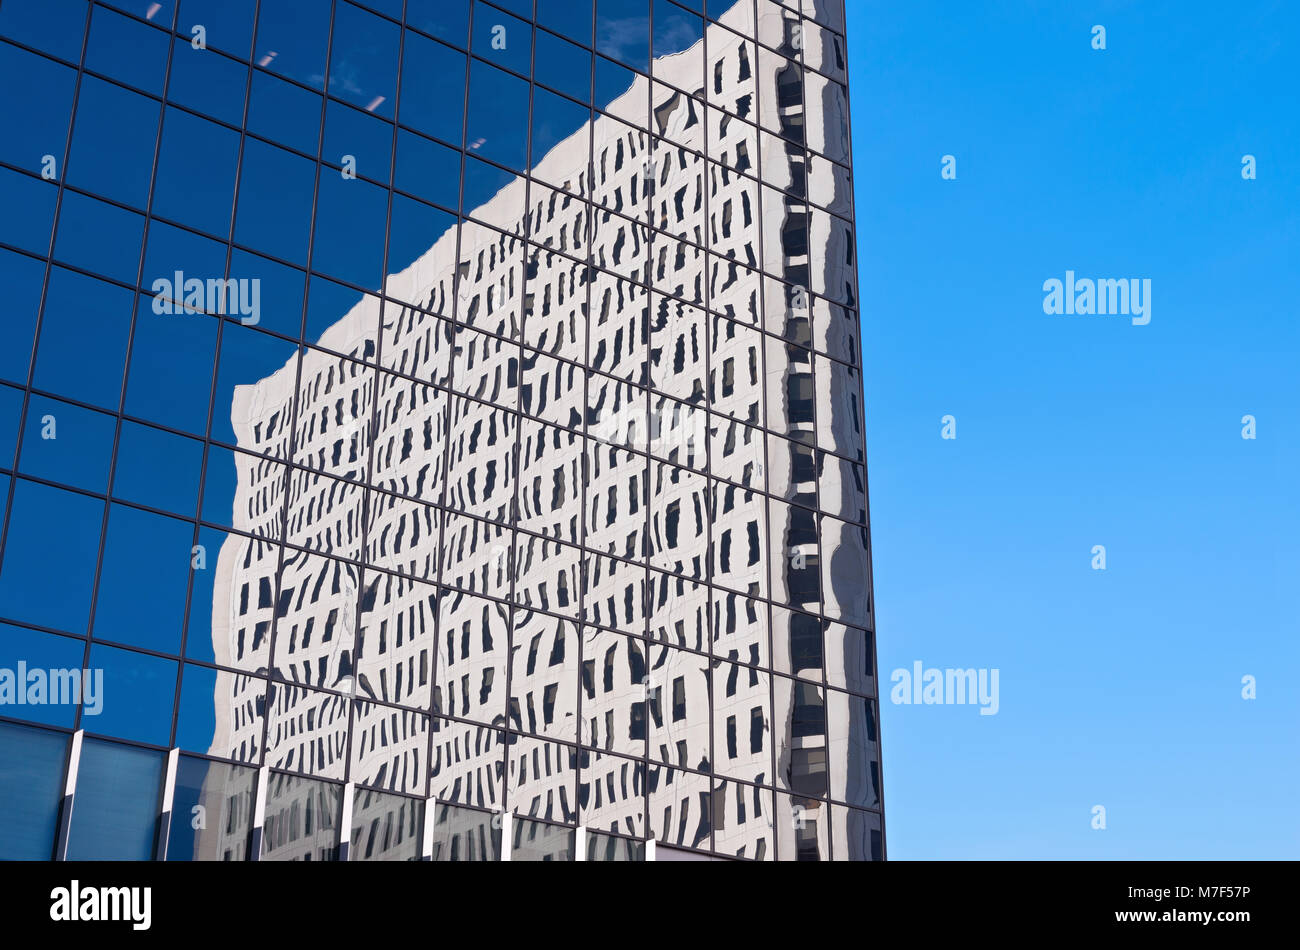 abstract of glass skyscraper with reflections of another skyscraper against blue sky Stock Photo